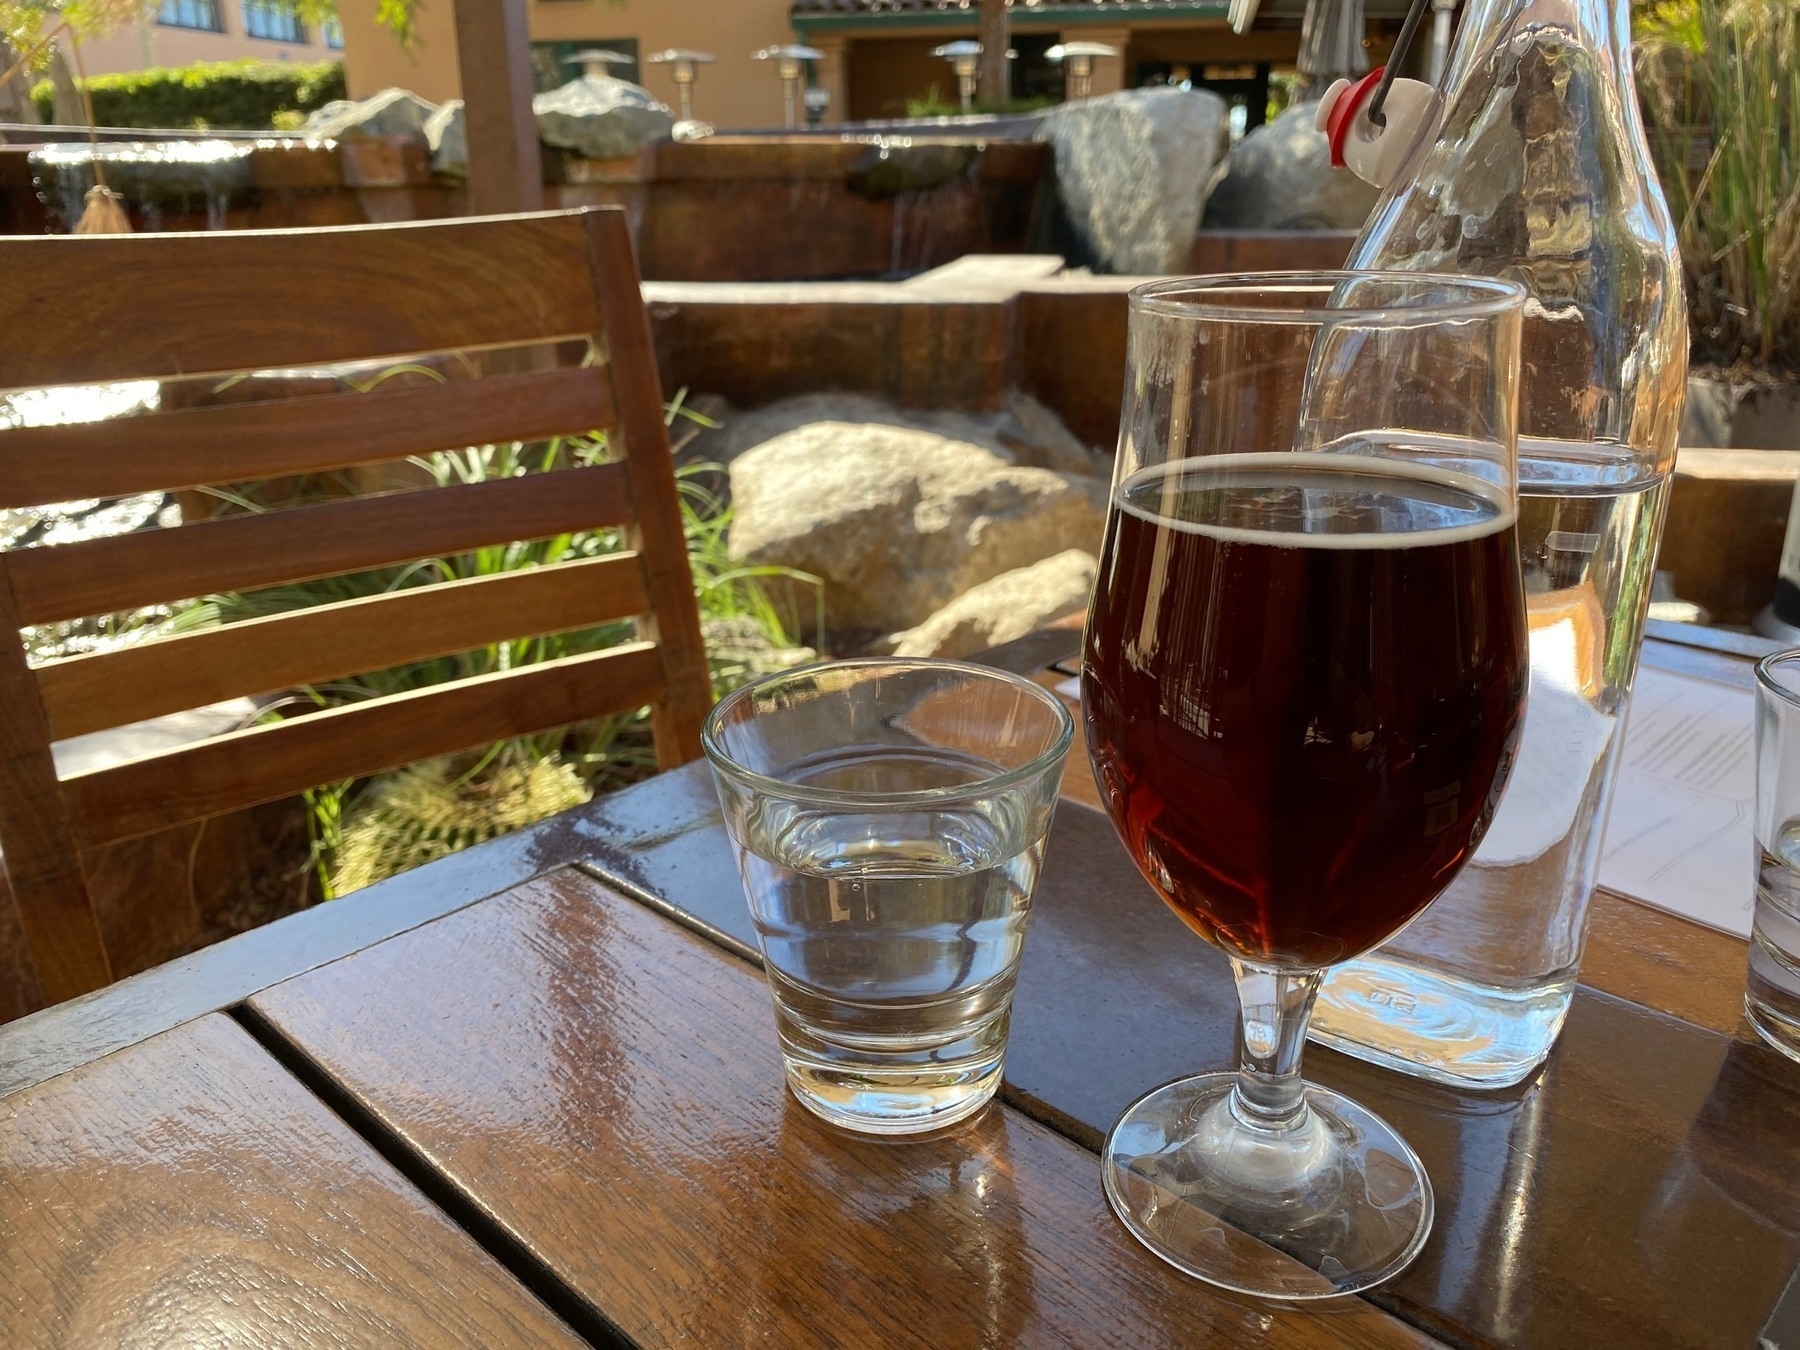 A glass of beer on a wooden table with a small fountain in the background.